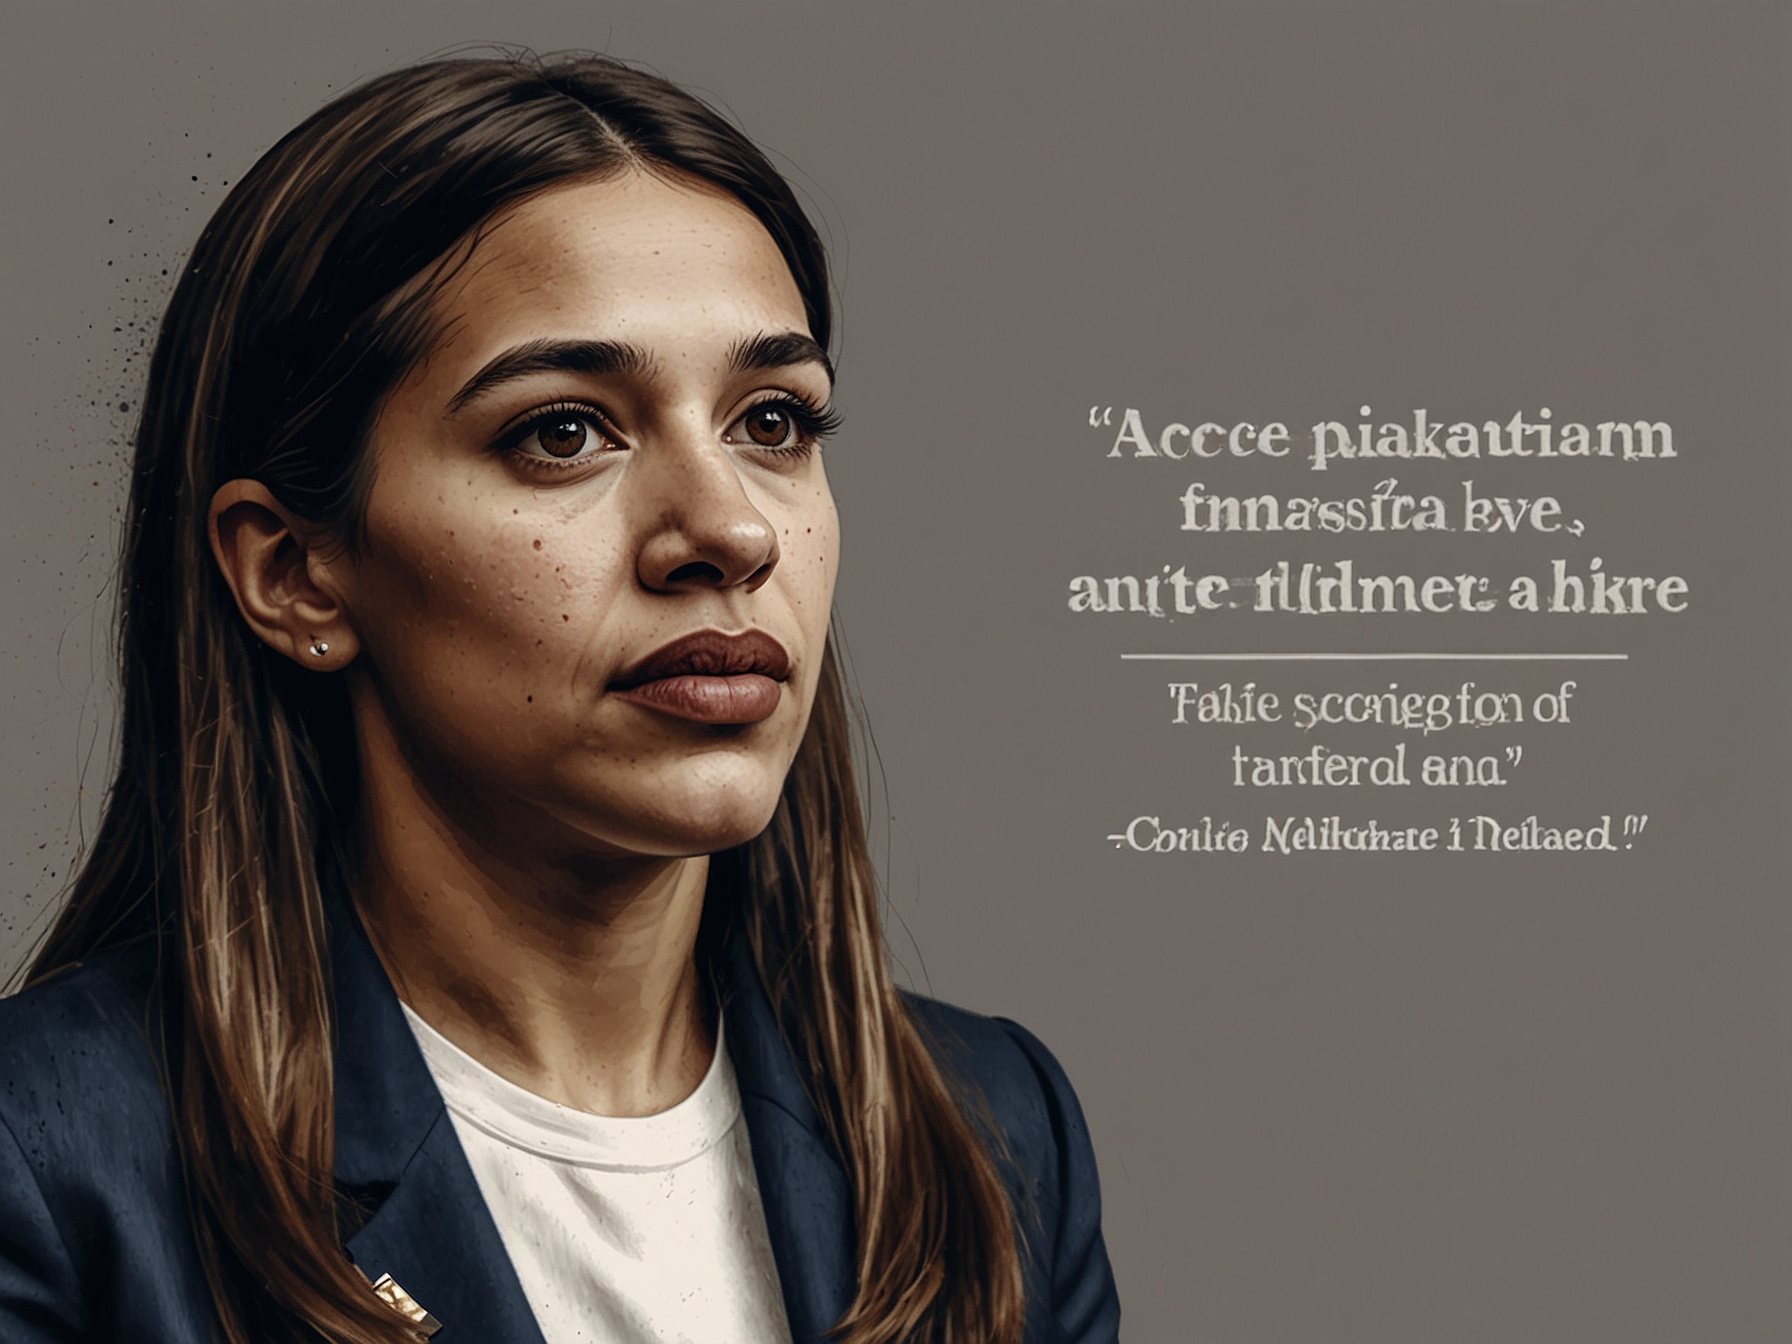 A digitally manipulated image showing a fake quote attributed to AOC about socialism. The image aims to highlight the spread of misinformation across social media platforms.